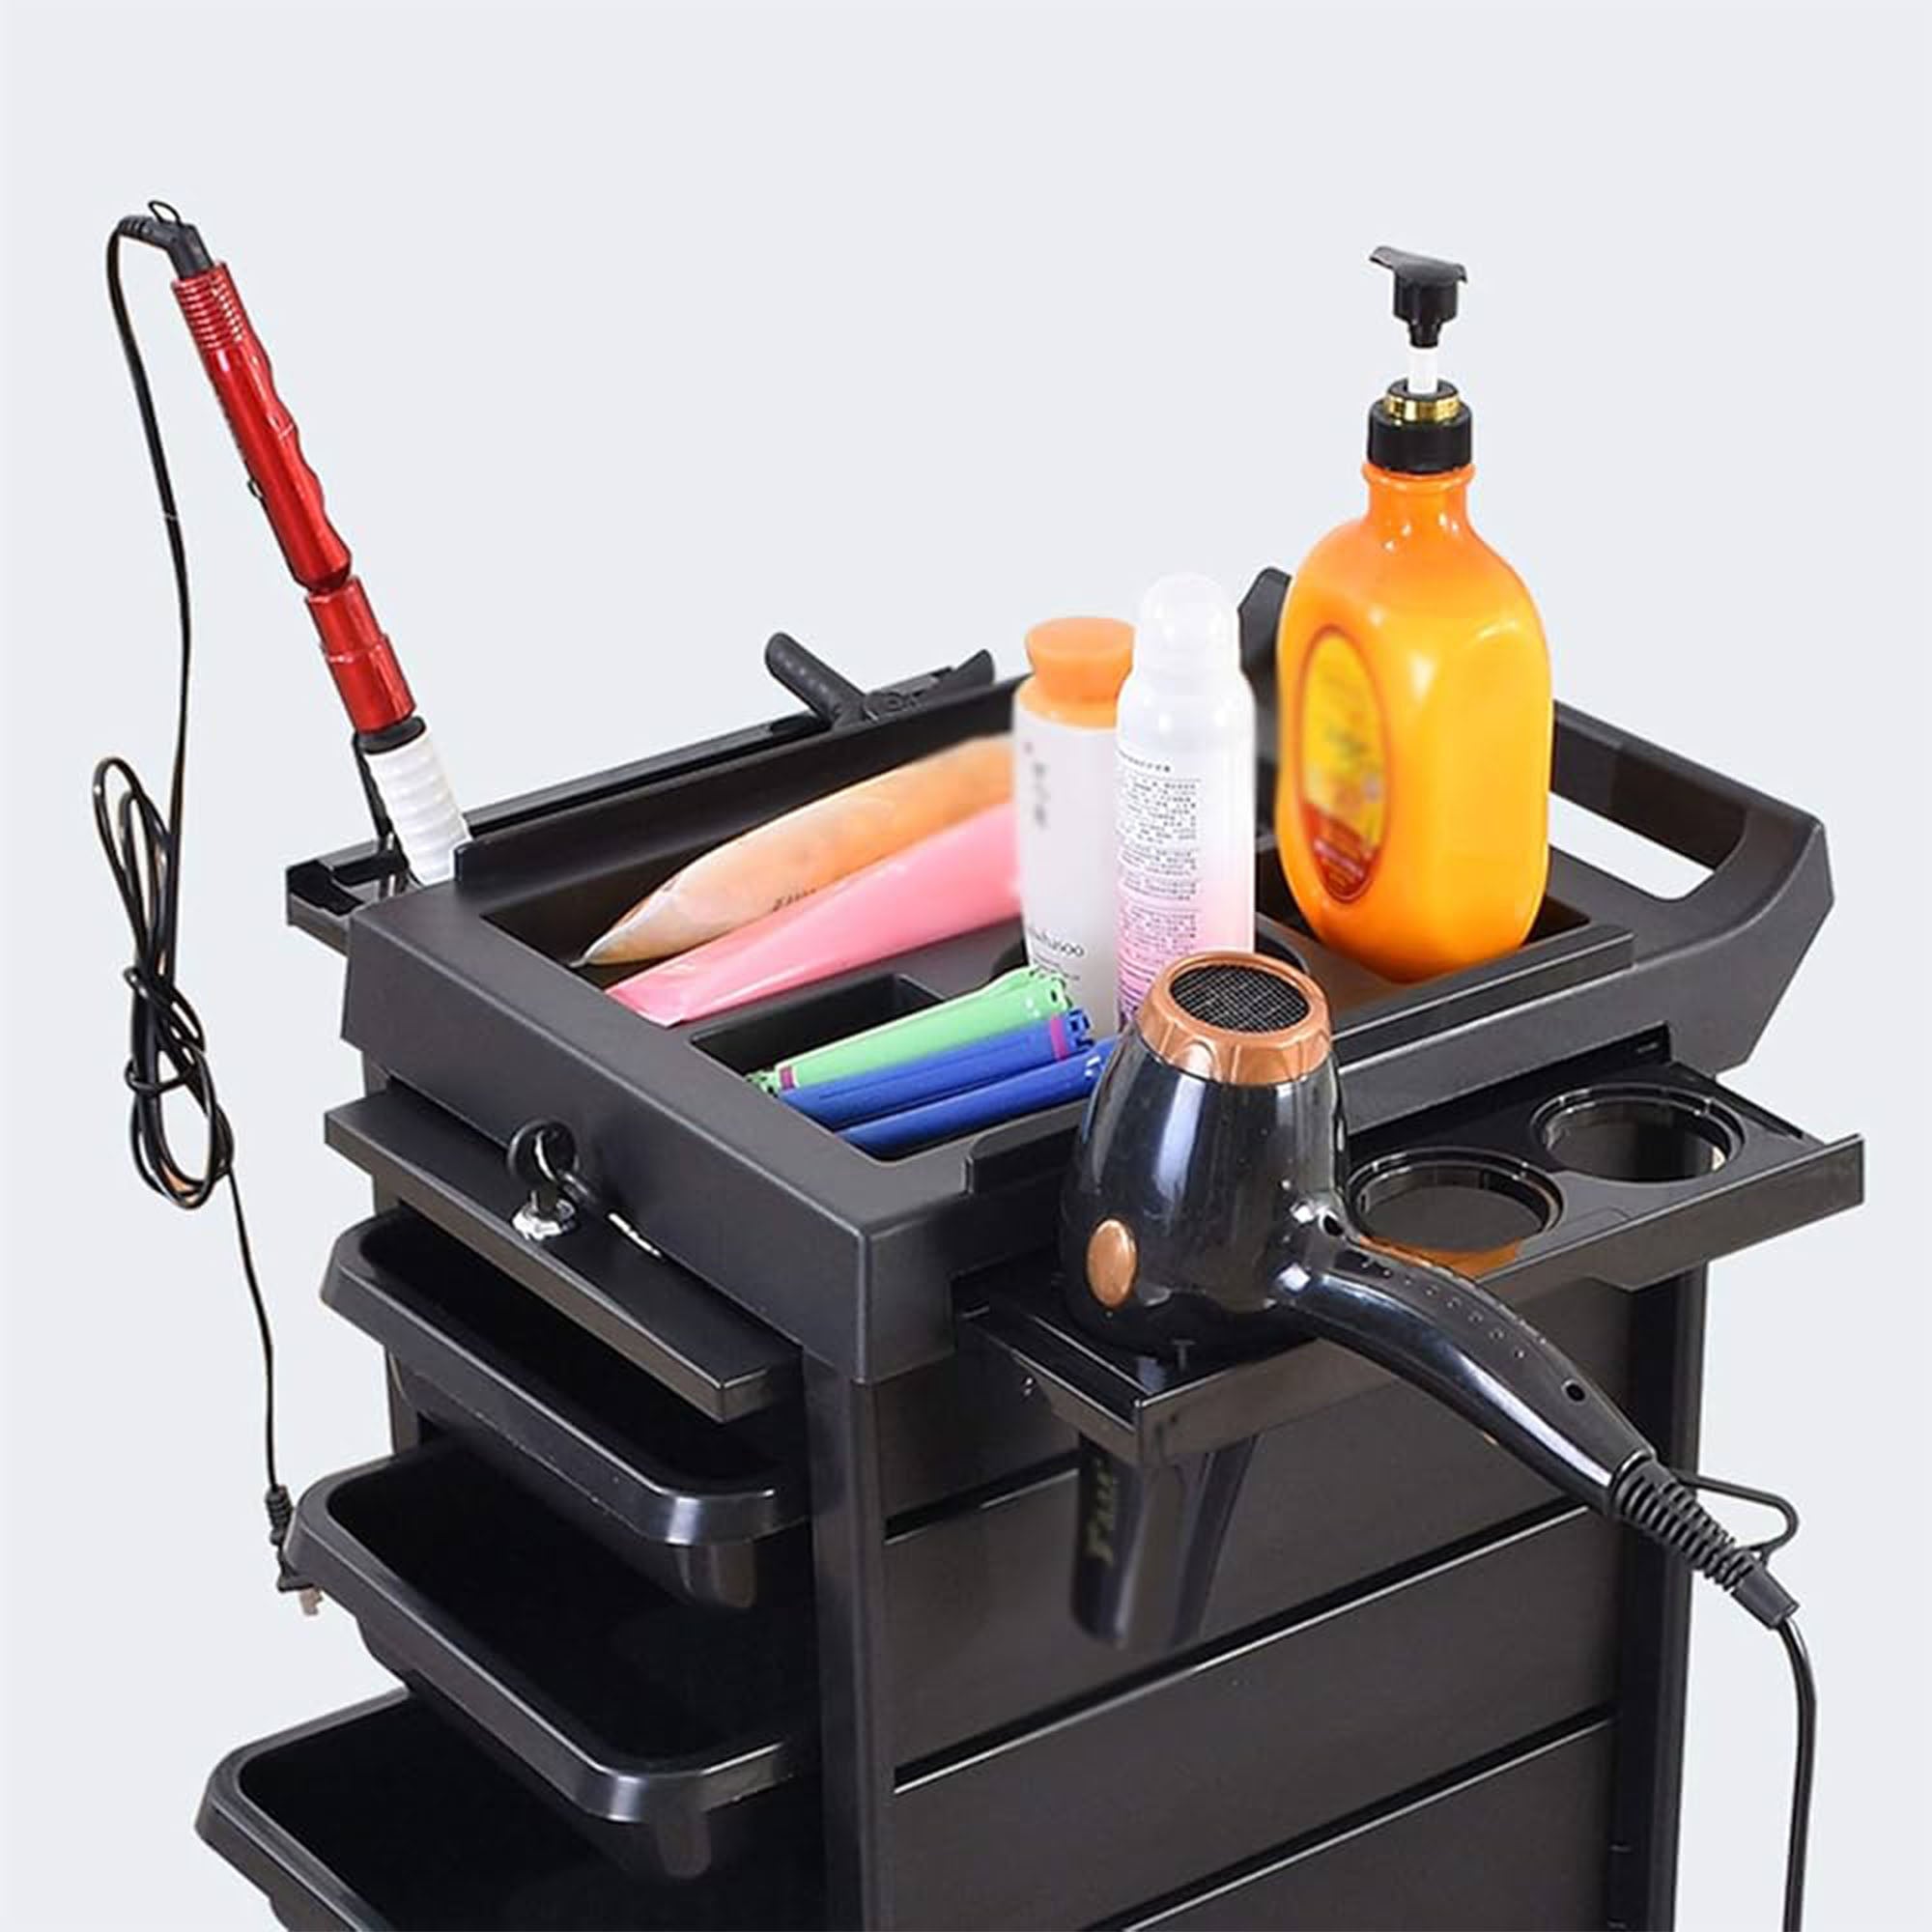 Eson - Hairdresser Multi-Function Trolley With Locking Doors